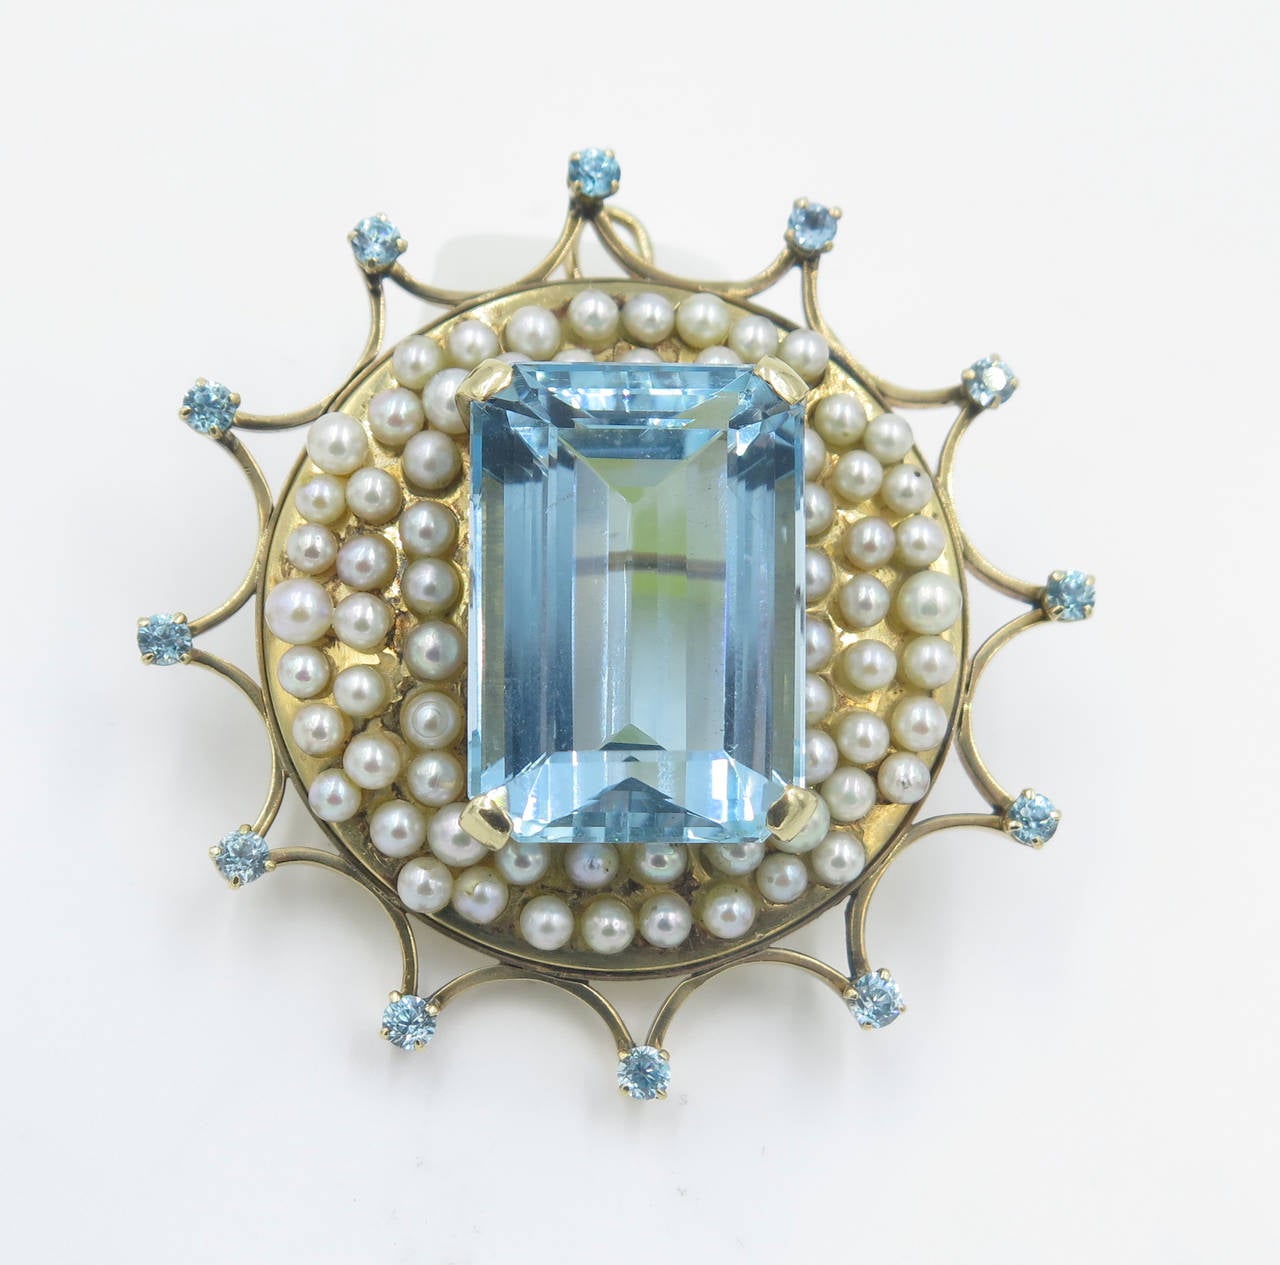 A yellow gold, aquamarine and pearl brooch. Circa 1940s. The circular brooch is set with an aquamarine in the center weighing approximately 31.80 carats, in a mount set with numerous random sized cultured pearls, the frame is set with 12 round